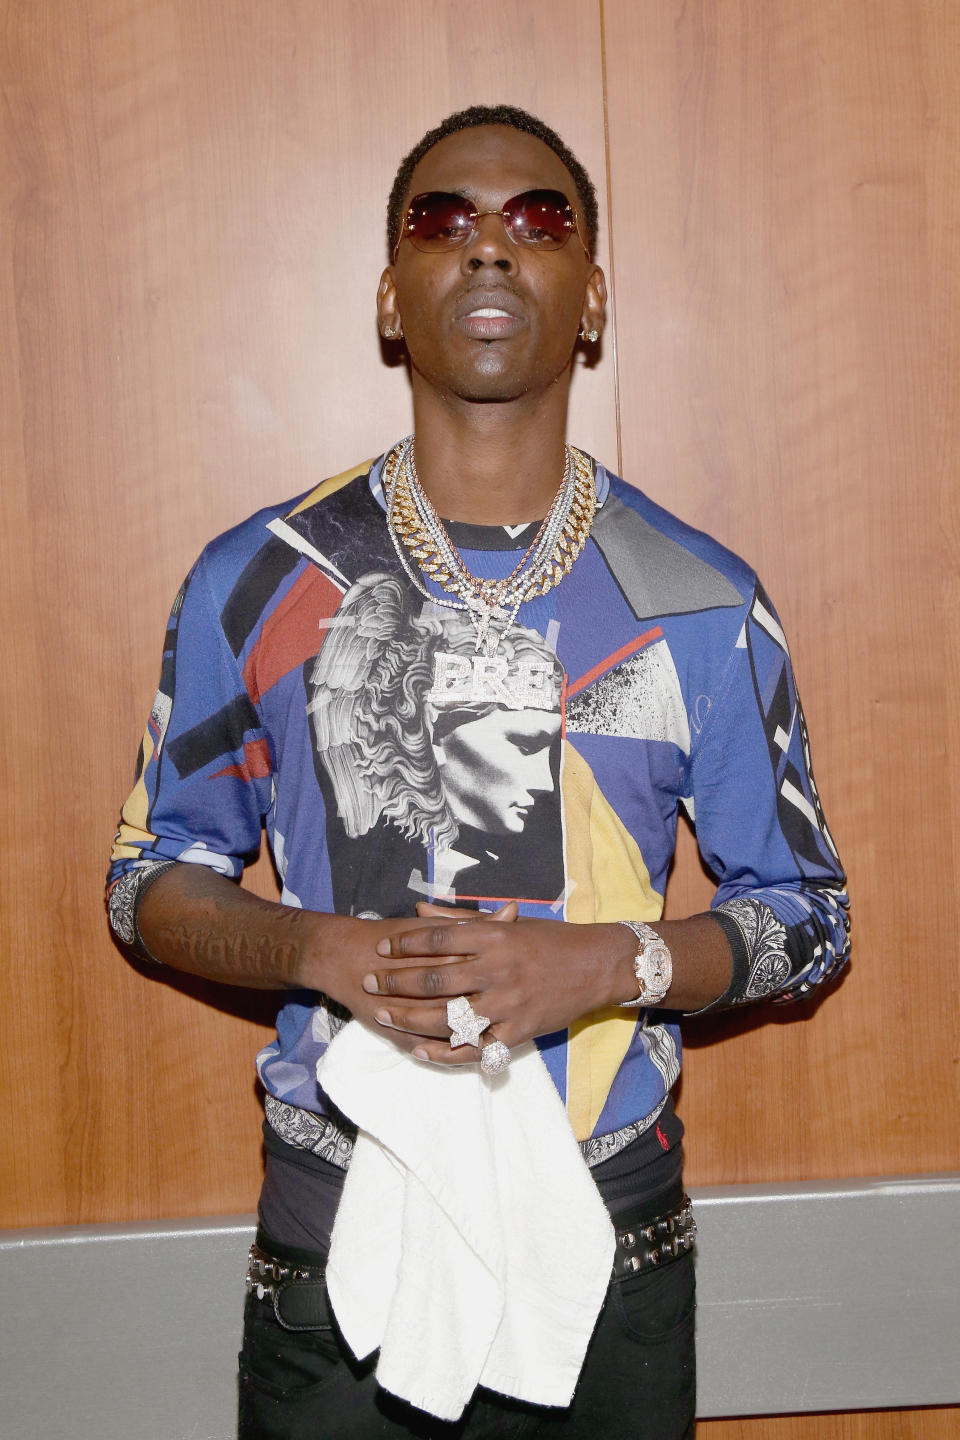 LOS ANGELES, CA – JUNE 24: Young Dolph attends night three of the STAPLES Center Concert, sponsored by Sprite, during the 2017 BET Experience at Staples Center on June 24, 2017 in Los Angeles, California. (Photo by Bennett Raglin/Getty Images for BET)